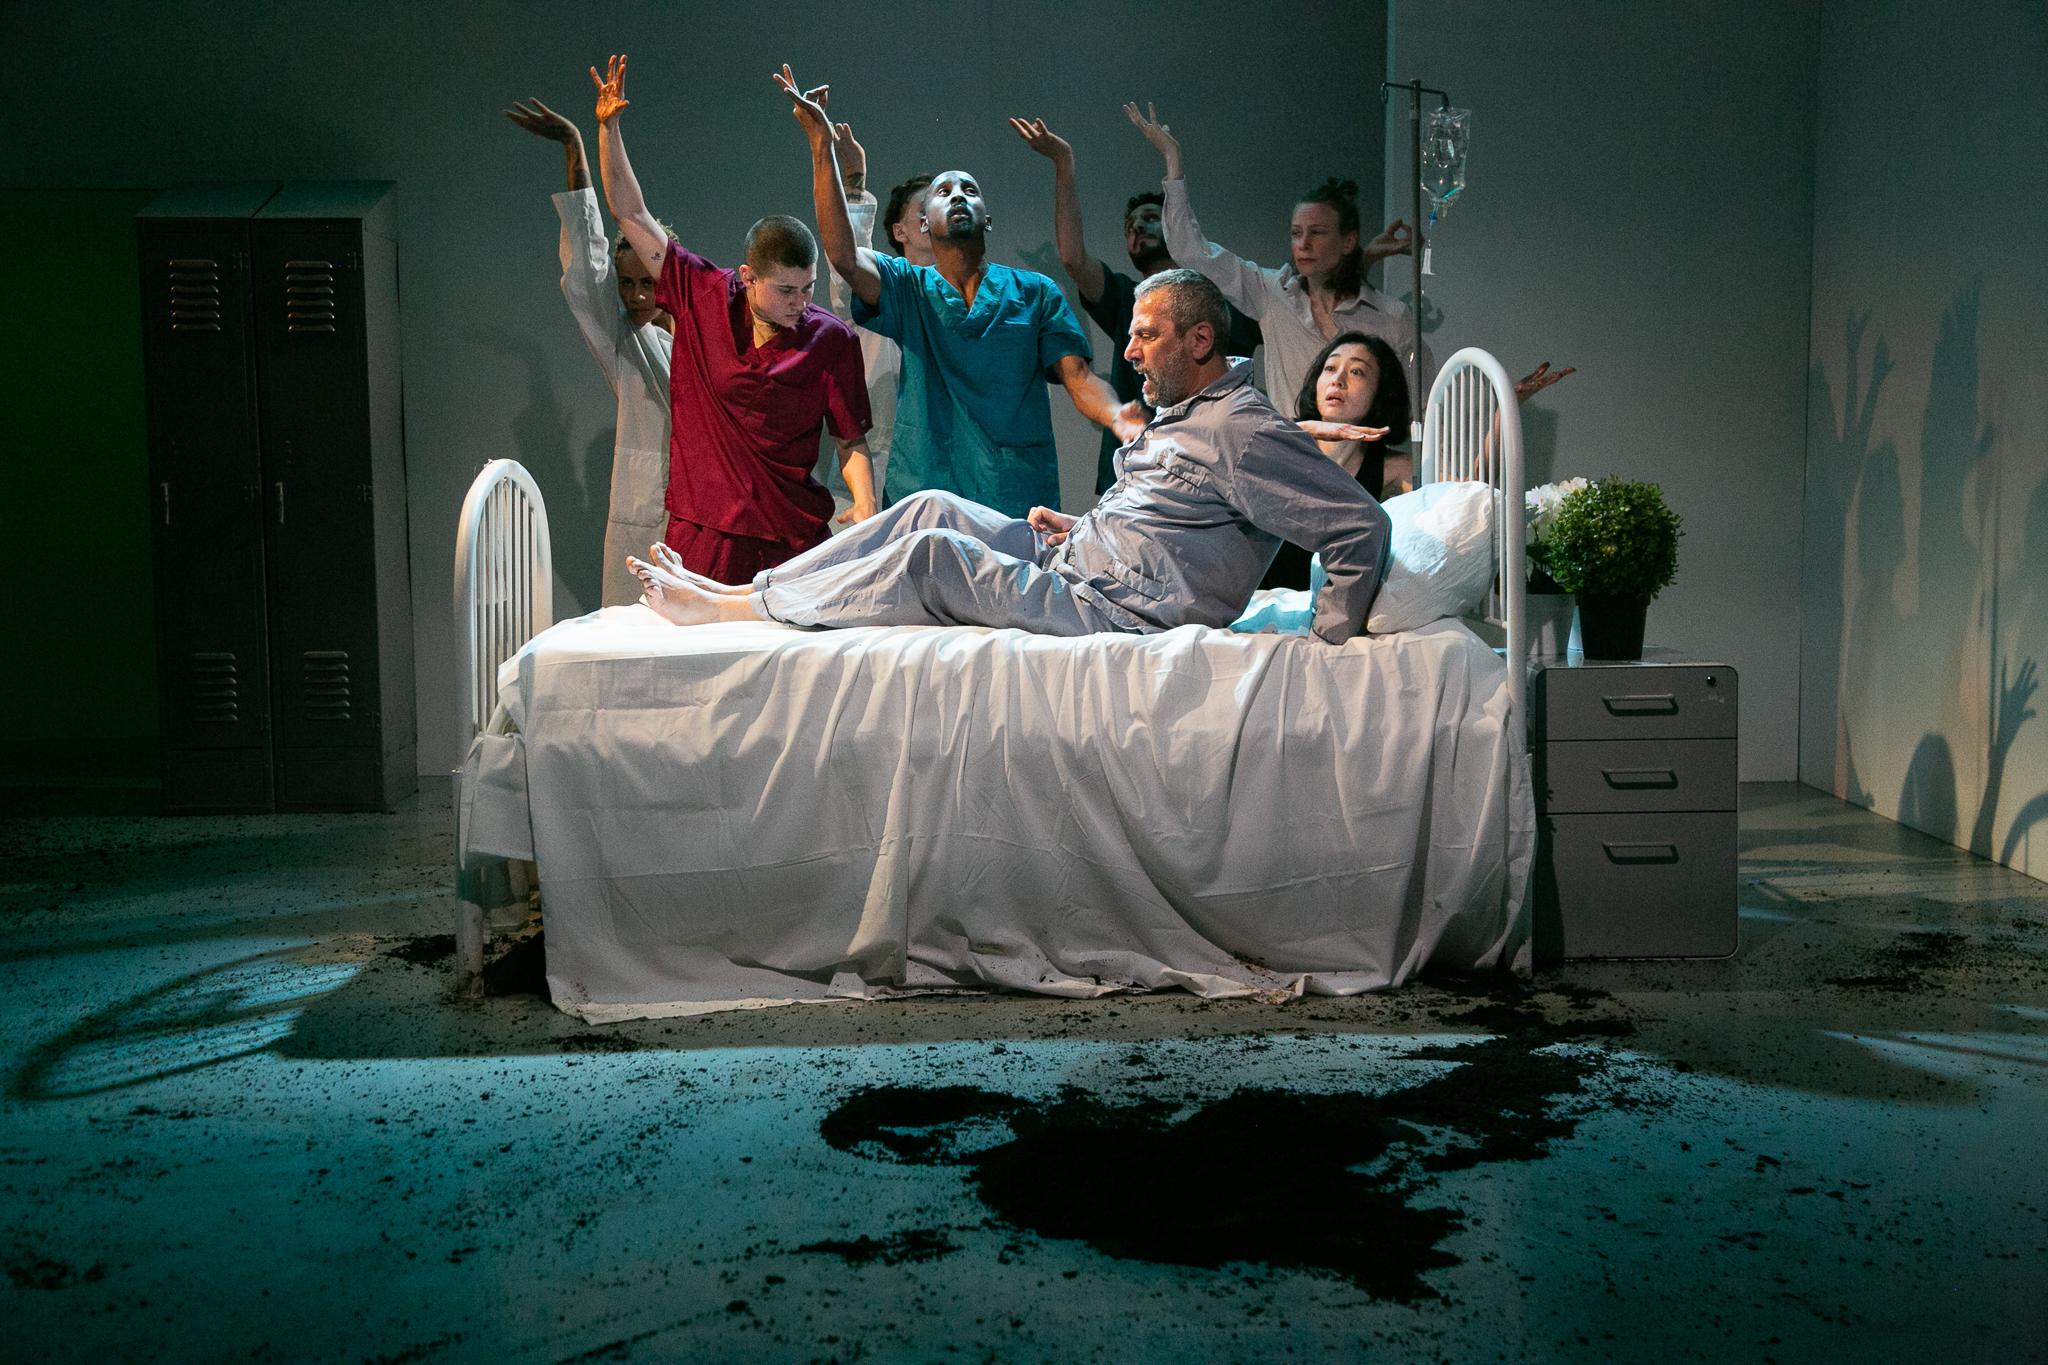 Dancers dressed as caregivers, surrounding a man on a hospital bed 